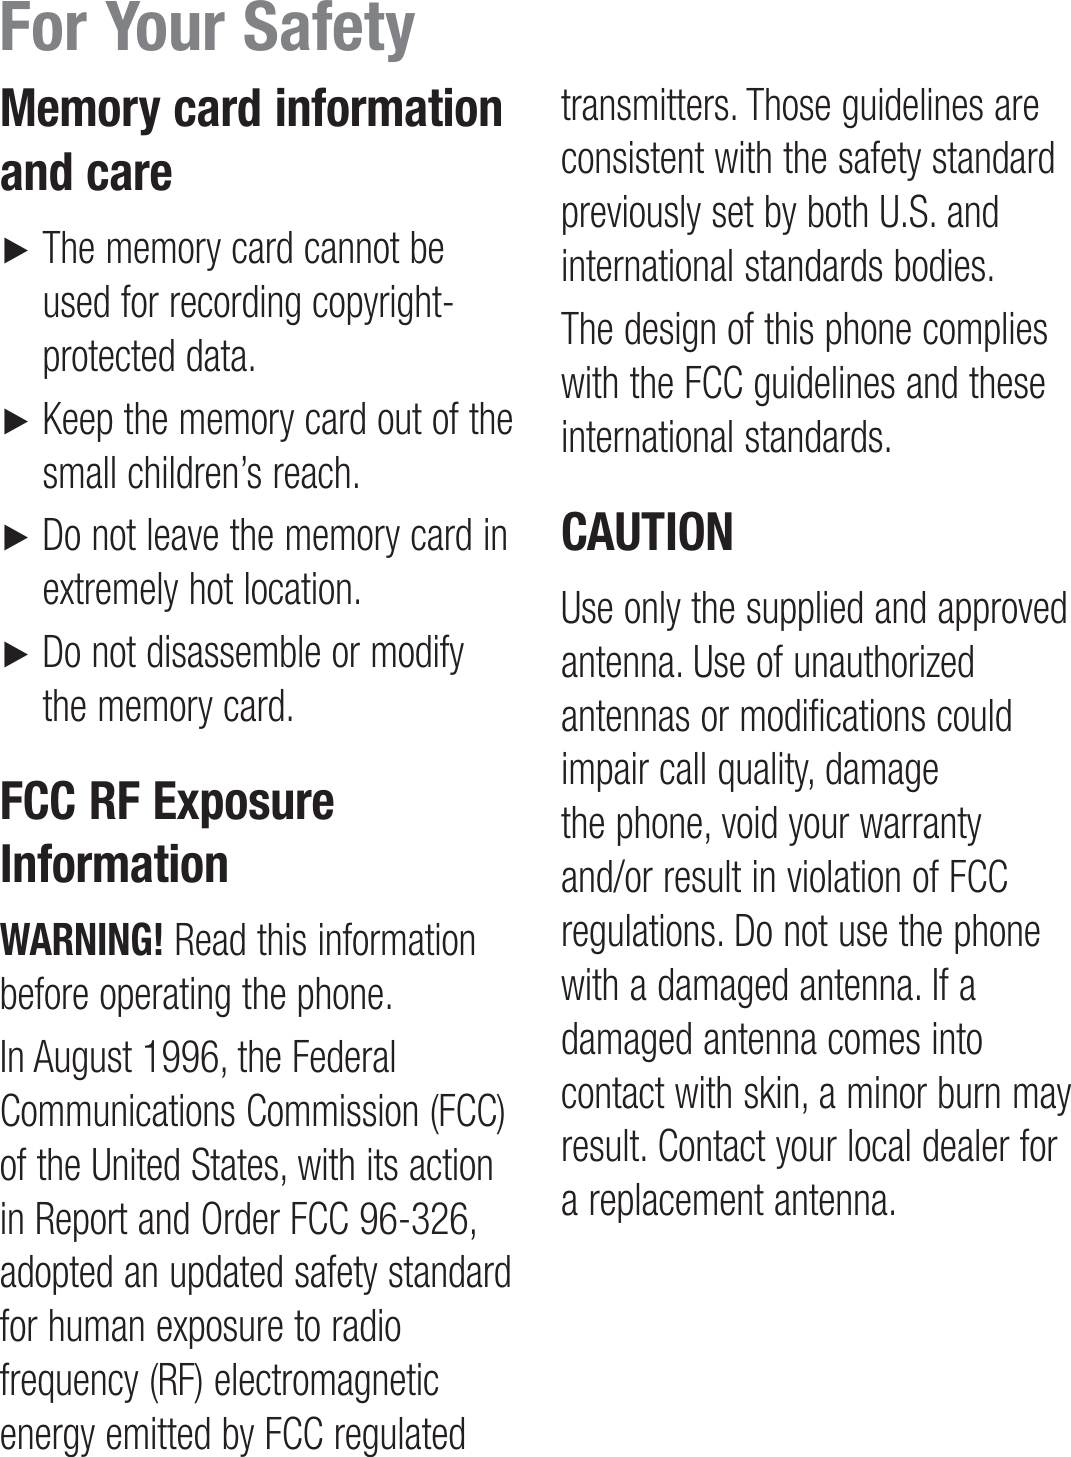 Memory card information and care►    The memory card cannot be used for recording copyright- protected data.►    Keep the memory card out of the small children’s reach.►     Do not leave the memory card in extremely hot location.►    Do not disassemble or modify the memory card.FCC RF Exposure InformationWARNING! Read this information before operating the phone.In August 1996, the Federal Communications Commission (FCC) of the United States, with its action in Report and Order FCC 96-326, adopted an updated safety standard for human exposure to radio frequency (RF) electromagnetic energy emitted by FCC regulated transmitters. Those guidelines are consistent with the safety standard previously set by both U.S. and international standards bodies.The design of this phone complies with the FCC guidelines and these international standards.CAUTIONUse only the supplied and approved antenna. Use of unauthorized antennas or modifications could impair call quality, damage the phone, void your warranty and/or result in violation of FCC regulations. Do not use the phone with a damaged antenna. If a damaged antenna comes into contact with skin, a minor burn may result. Contact your local dealer for a replacement antenna.For Your Safety